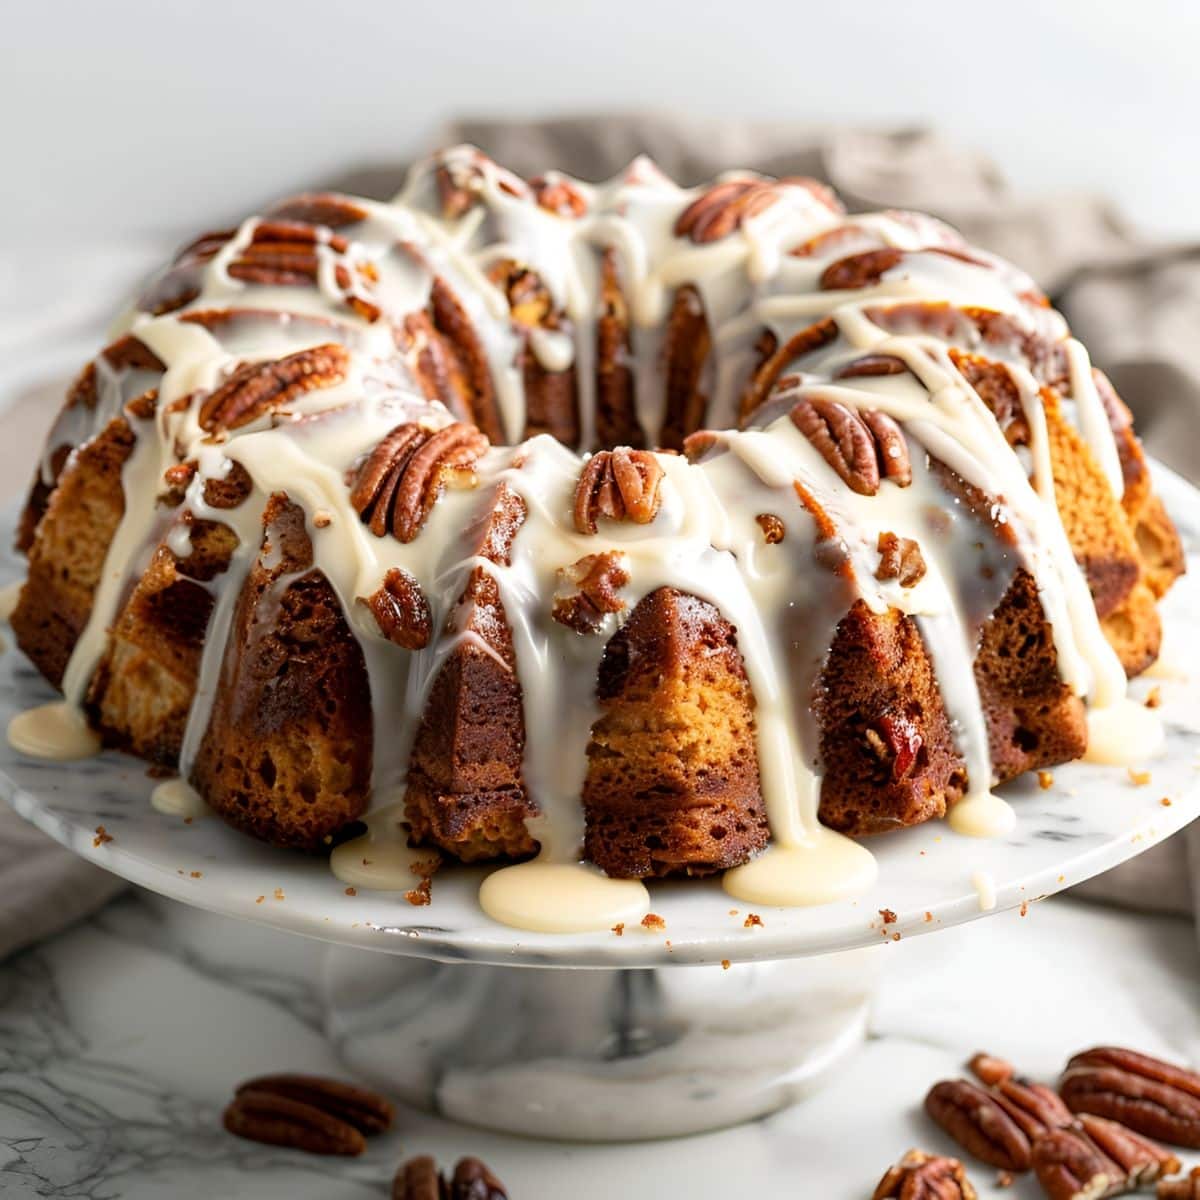 Full Bacardi Rum Cake with Pecans and Rum Glaze on a White Cake Stand